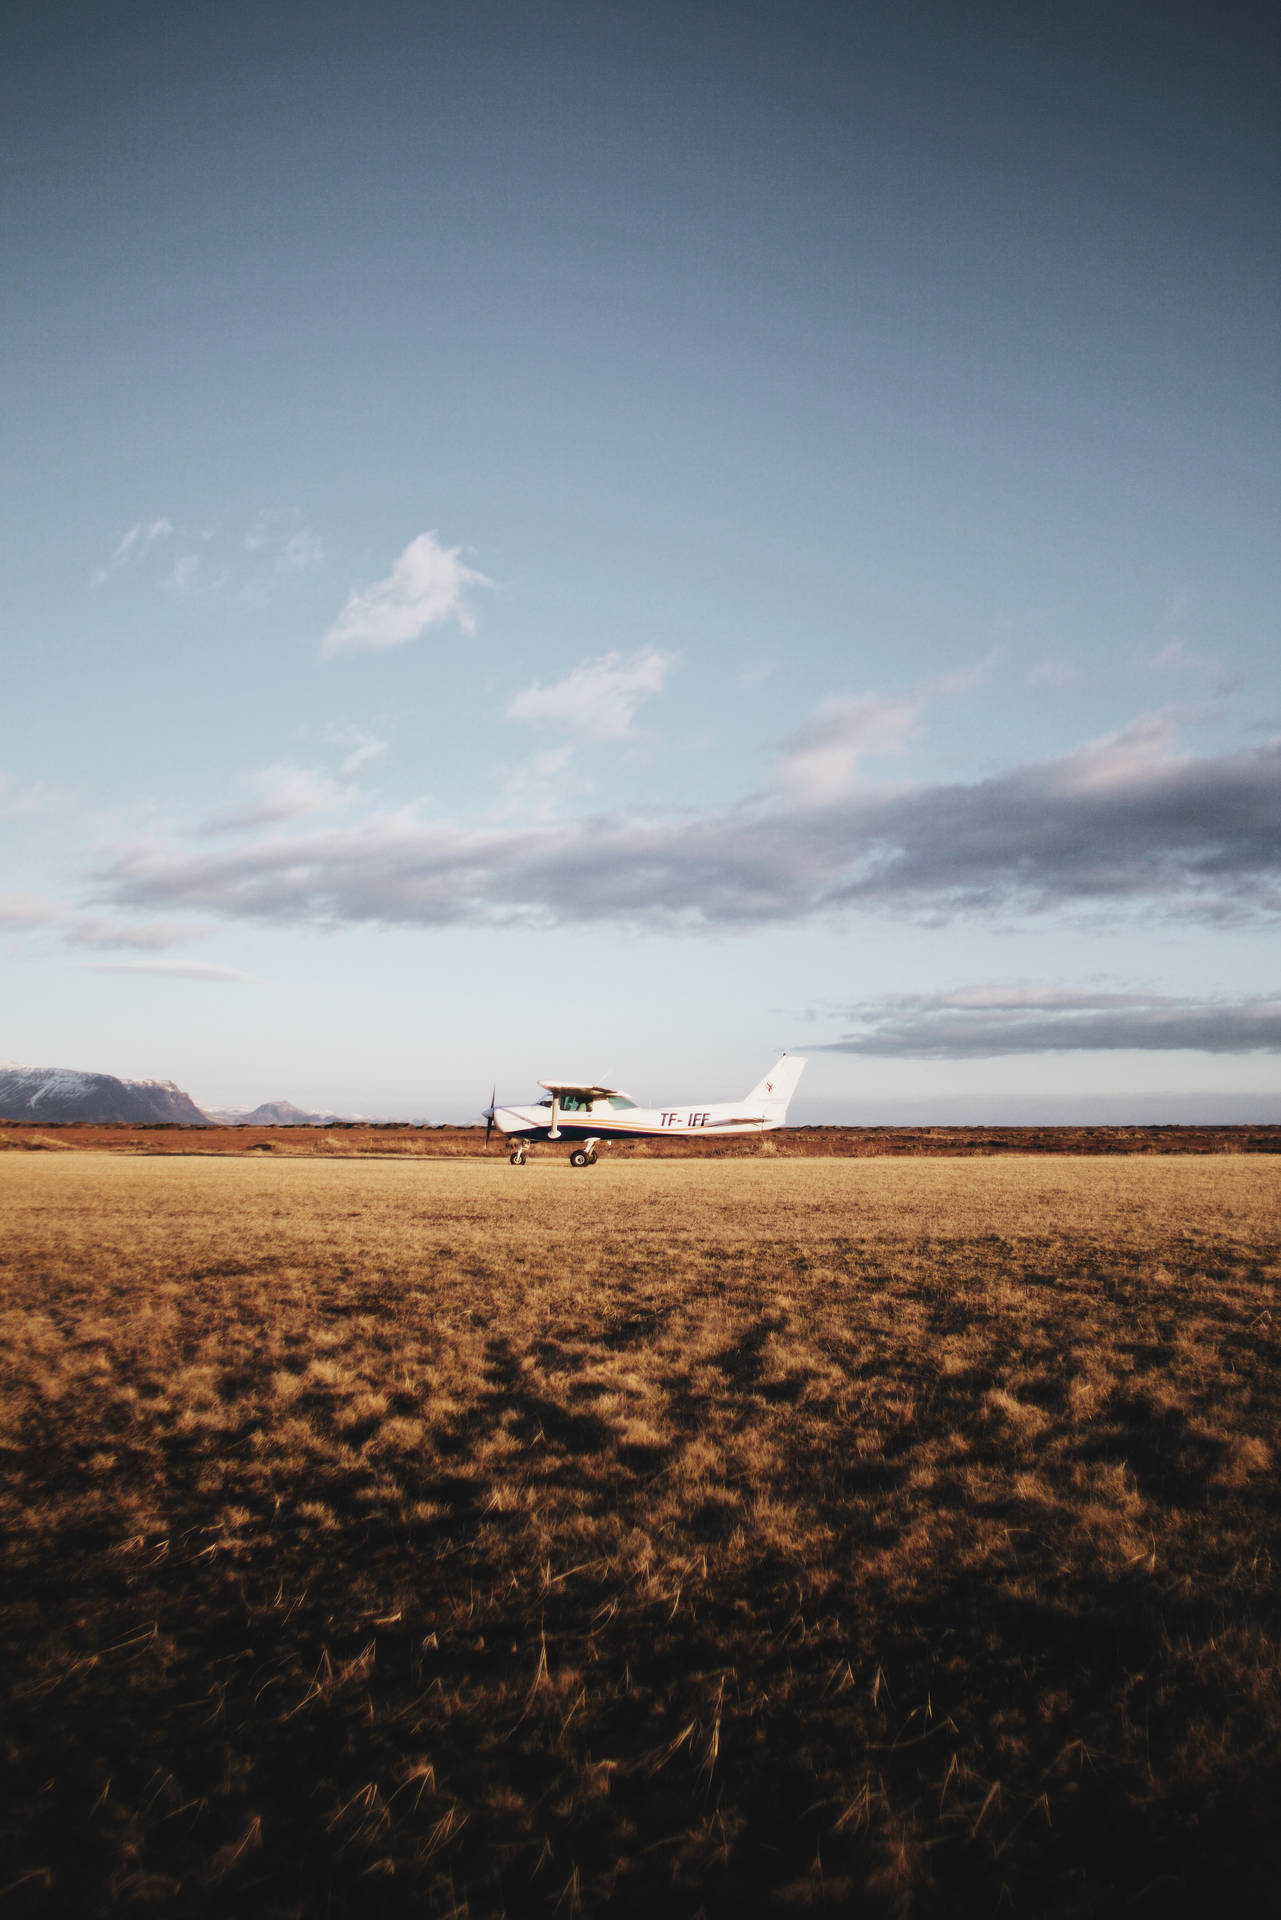 A Tinny White Plane Waiting For Takeoff In Open Field